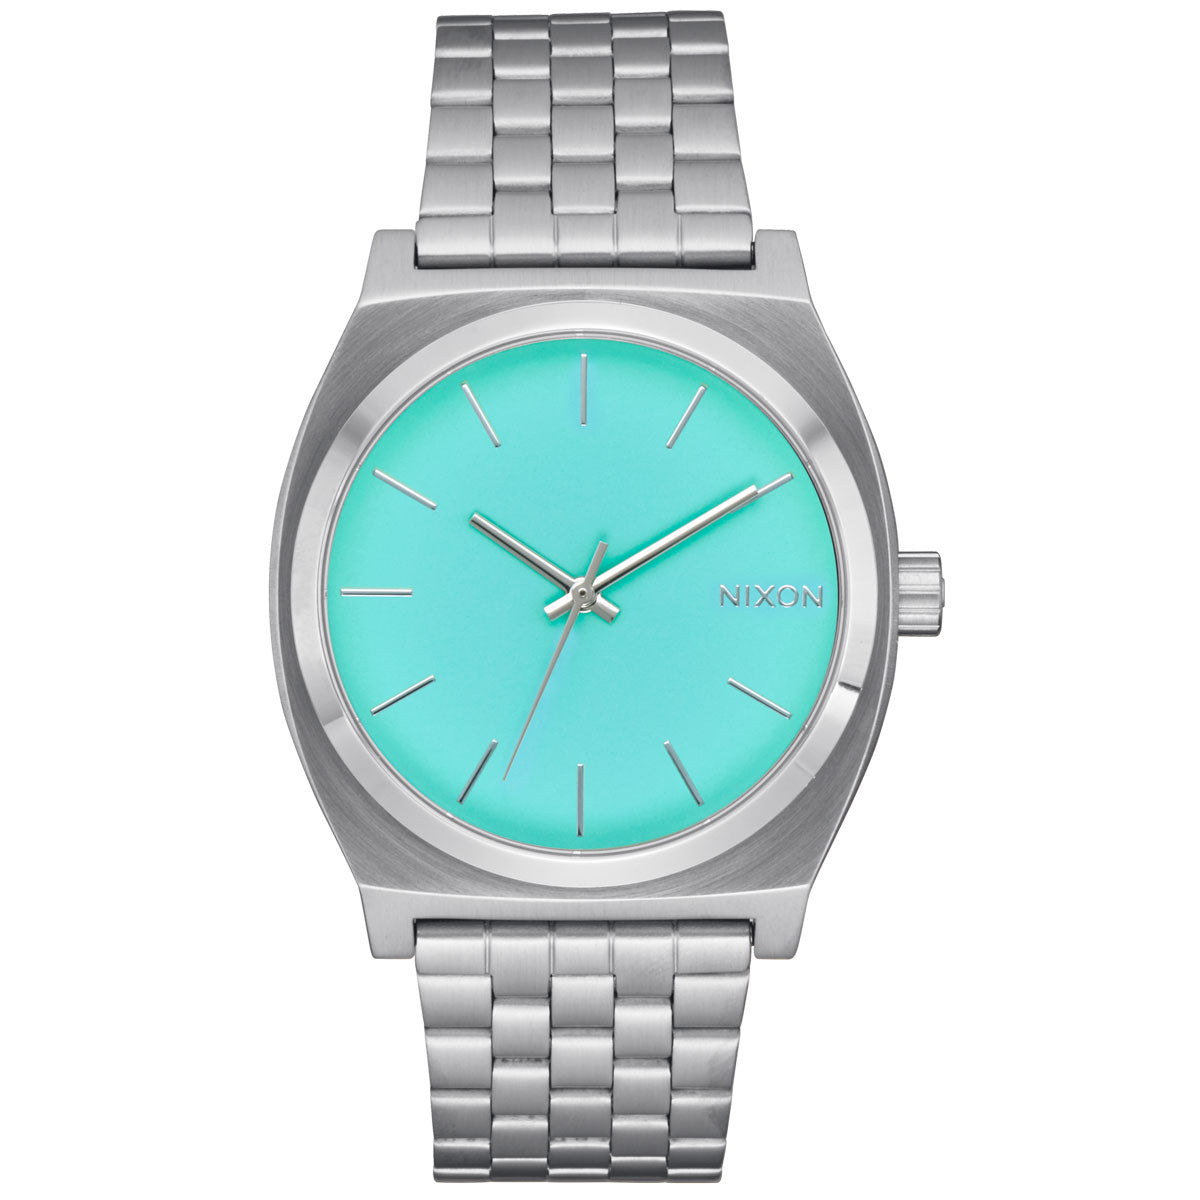 Nixon Time Teller Watch - Silver/Turquoise image 1